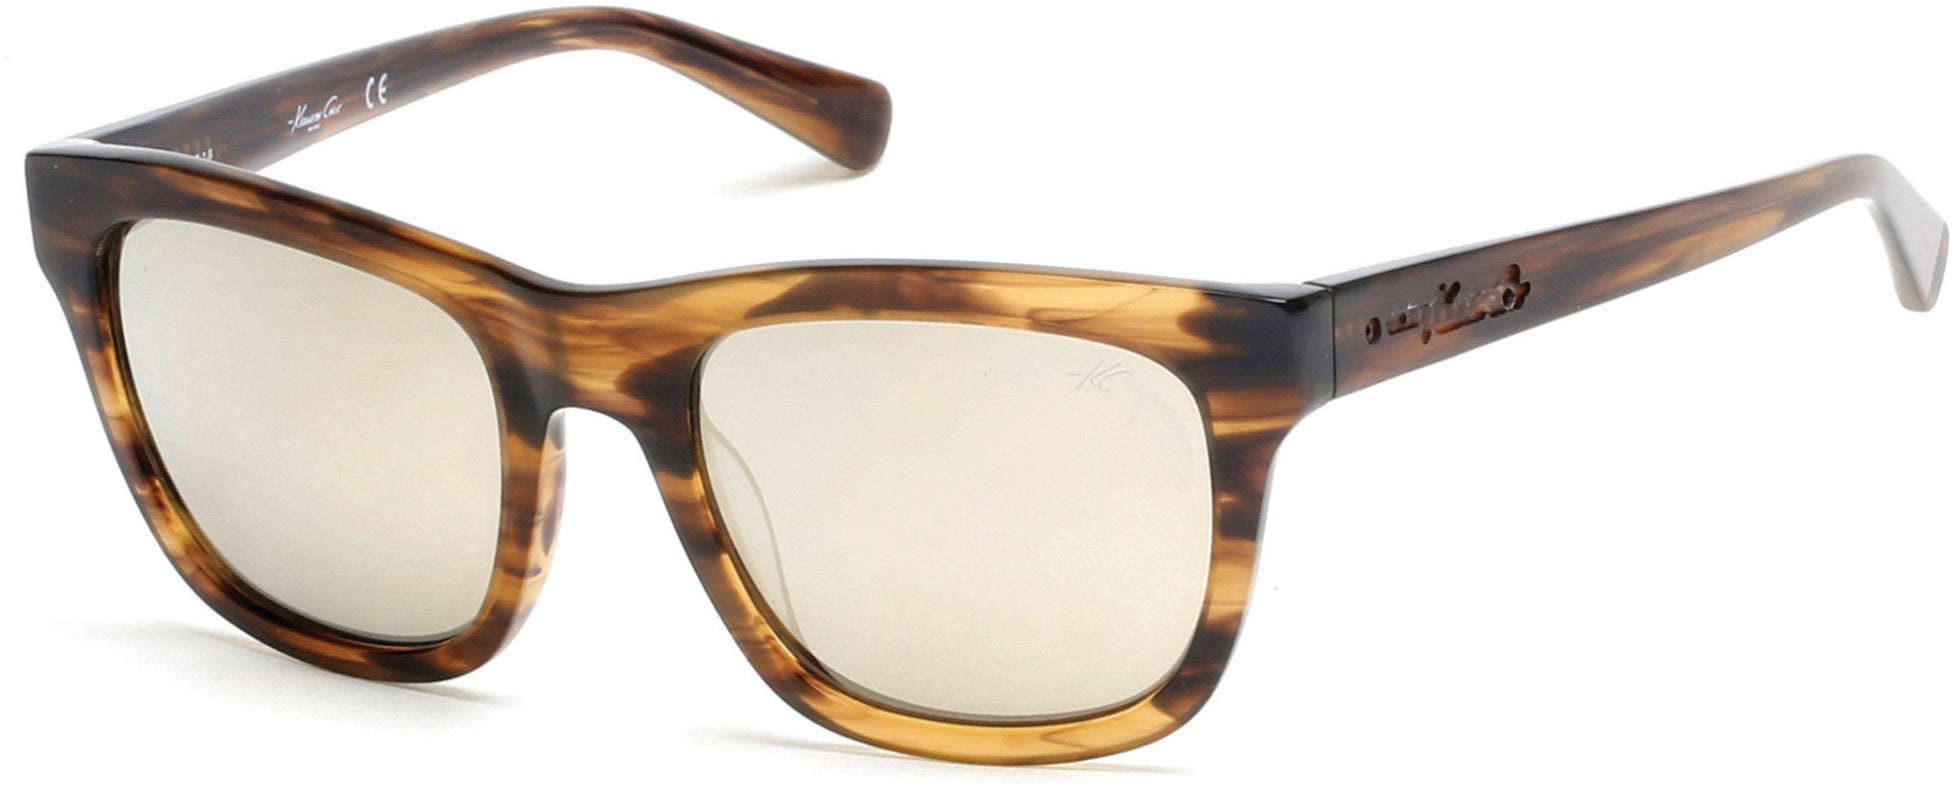 Kenneth Cole New York,Kenneth Cole Reaction KC7201 Geometric Sunglasses 62C-62C - Brown Horn / Smoke Mirror